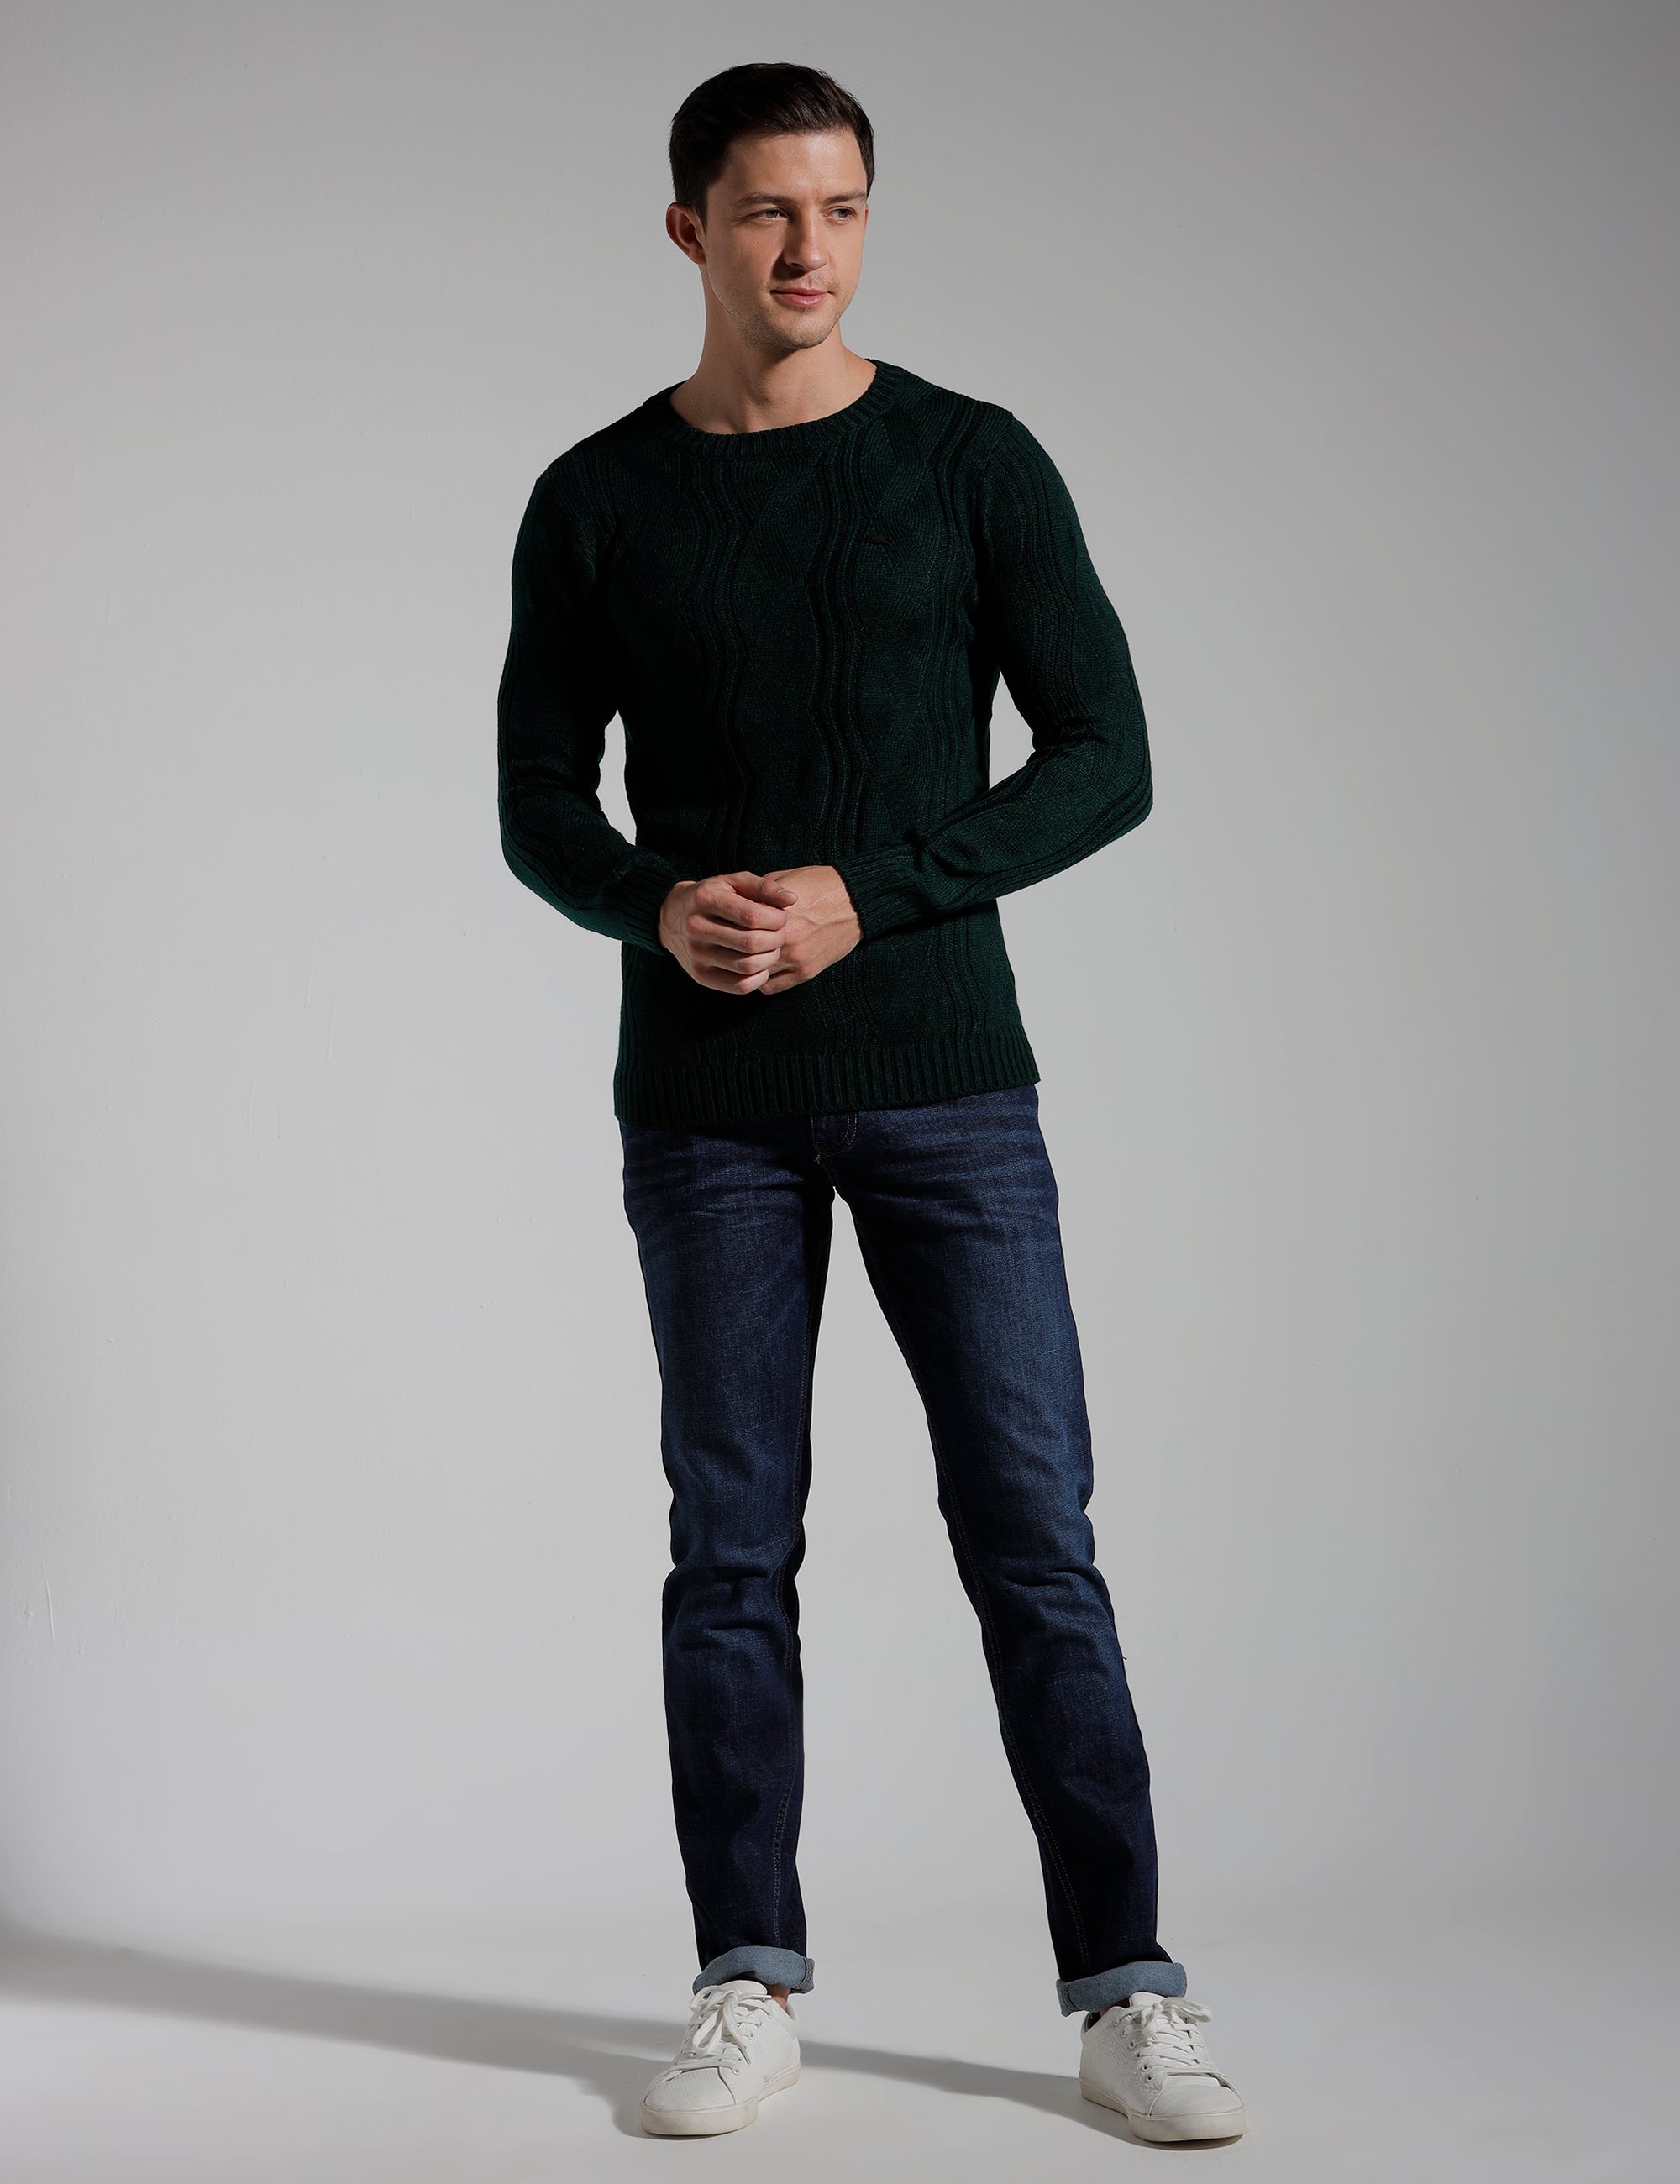 Identiti Full Sleeve Solid Slim Fit Cotton Casual Sweater Pull Over